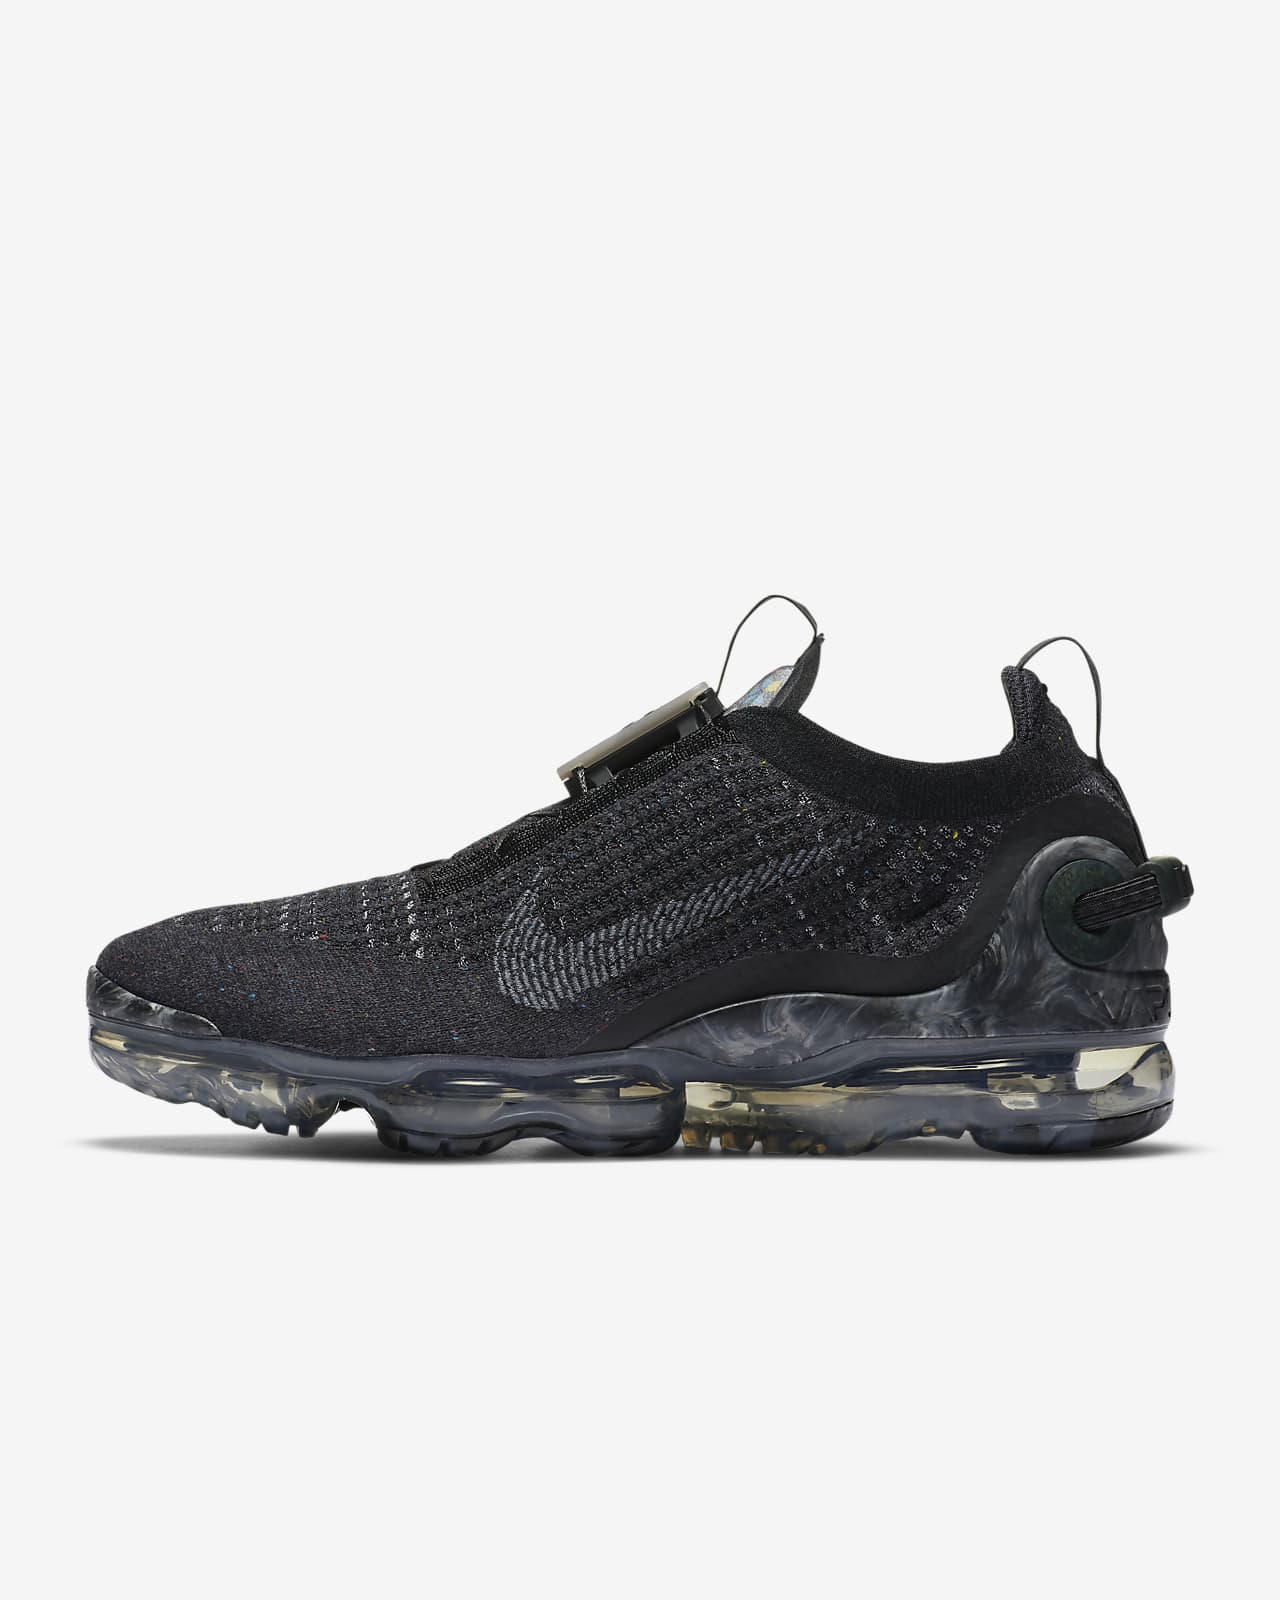 vapor max nike chaussure homme